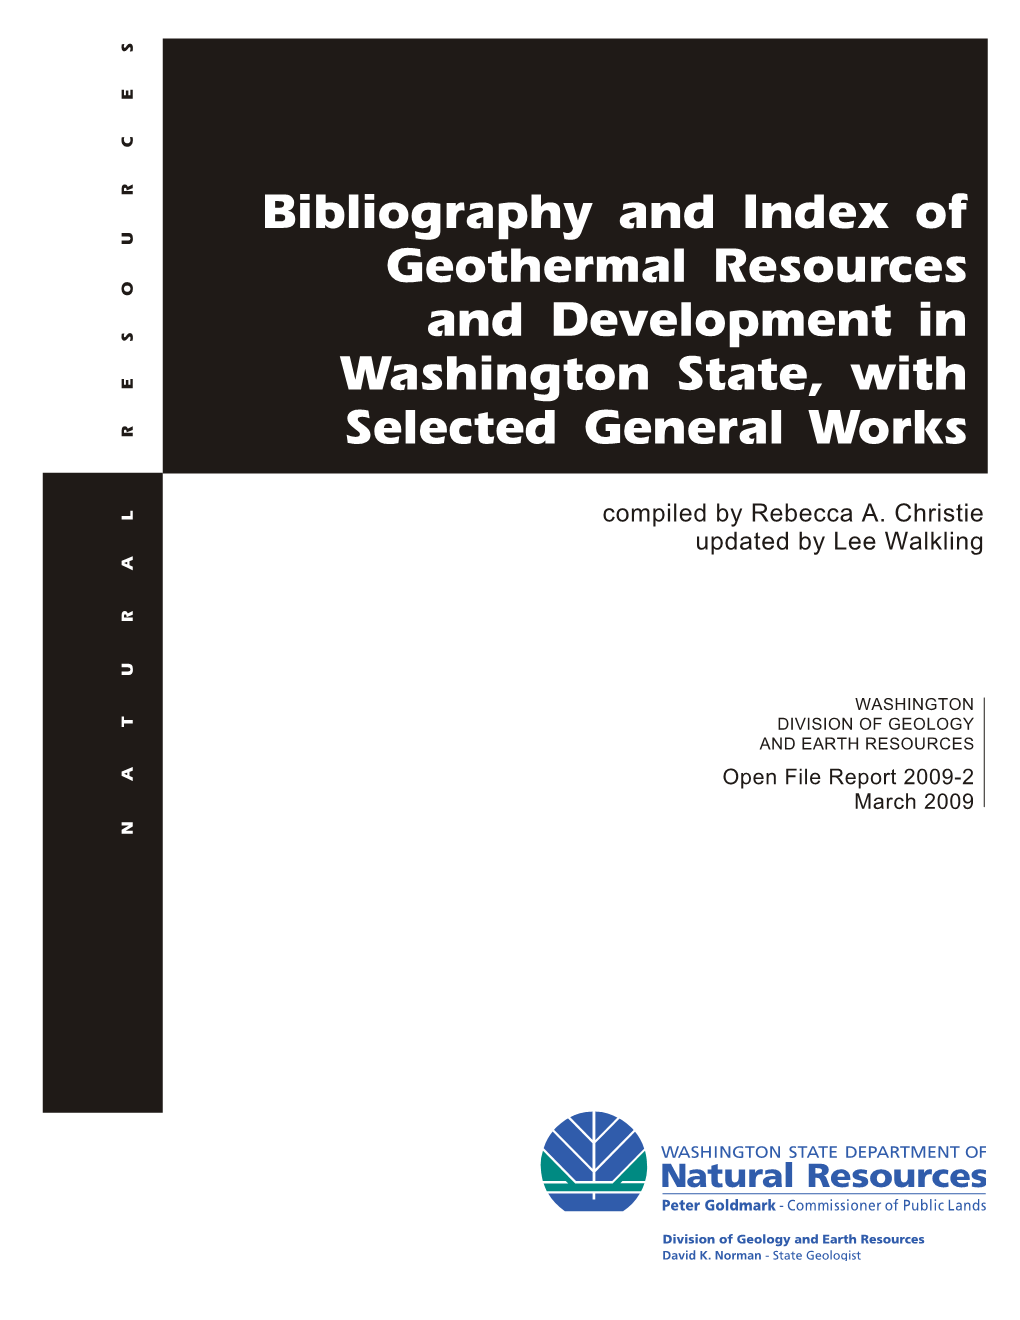 Open File Report 2009-2. Bibliography and Index Of